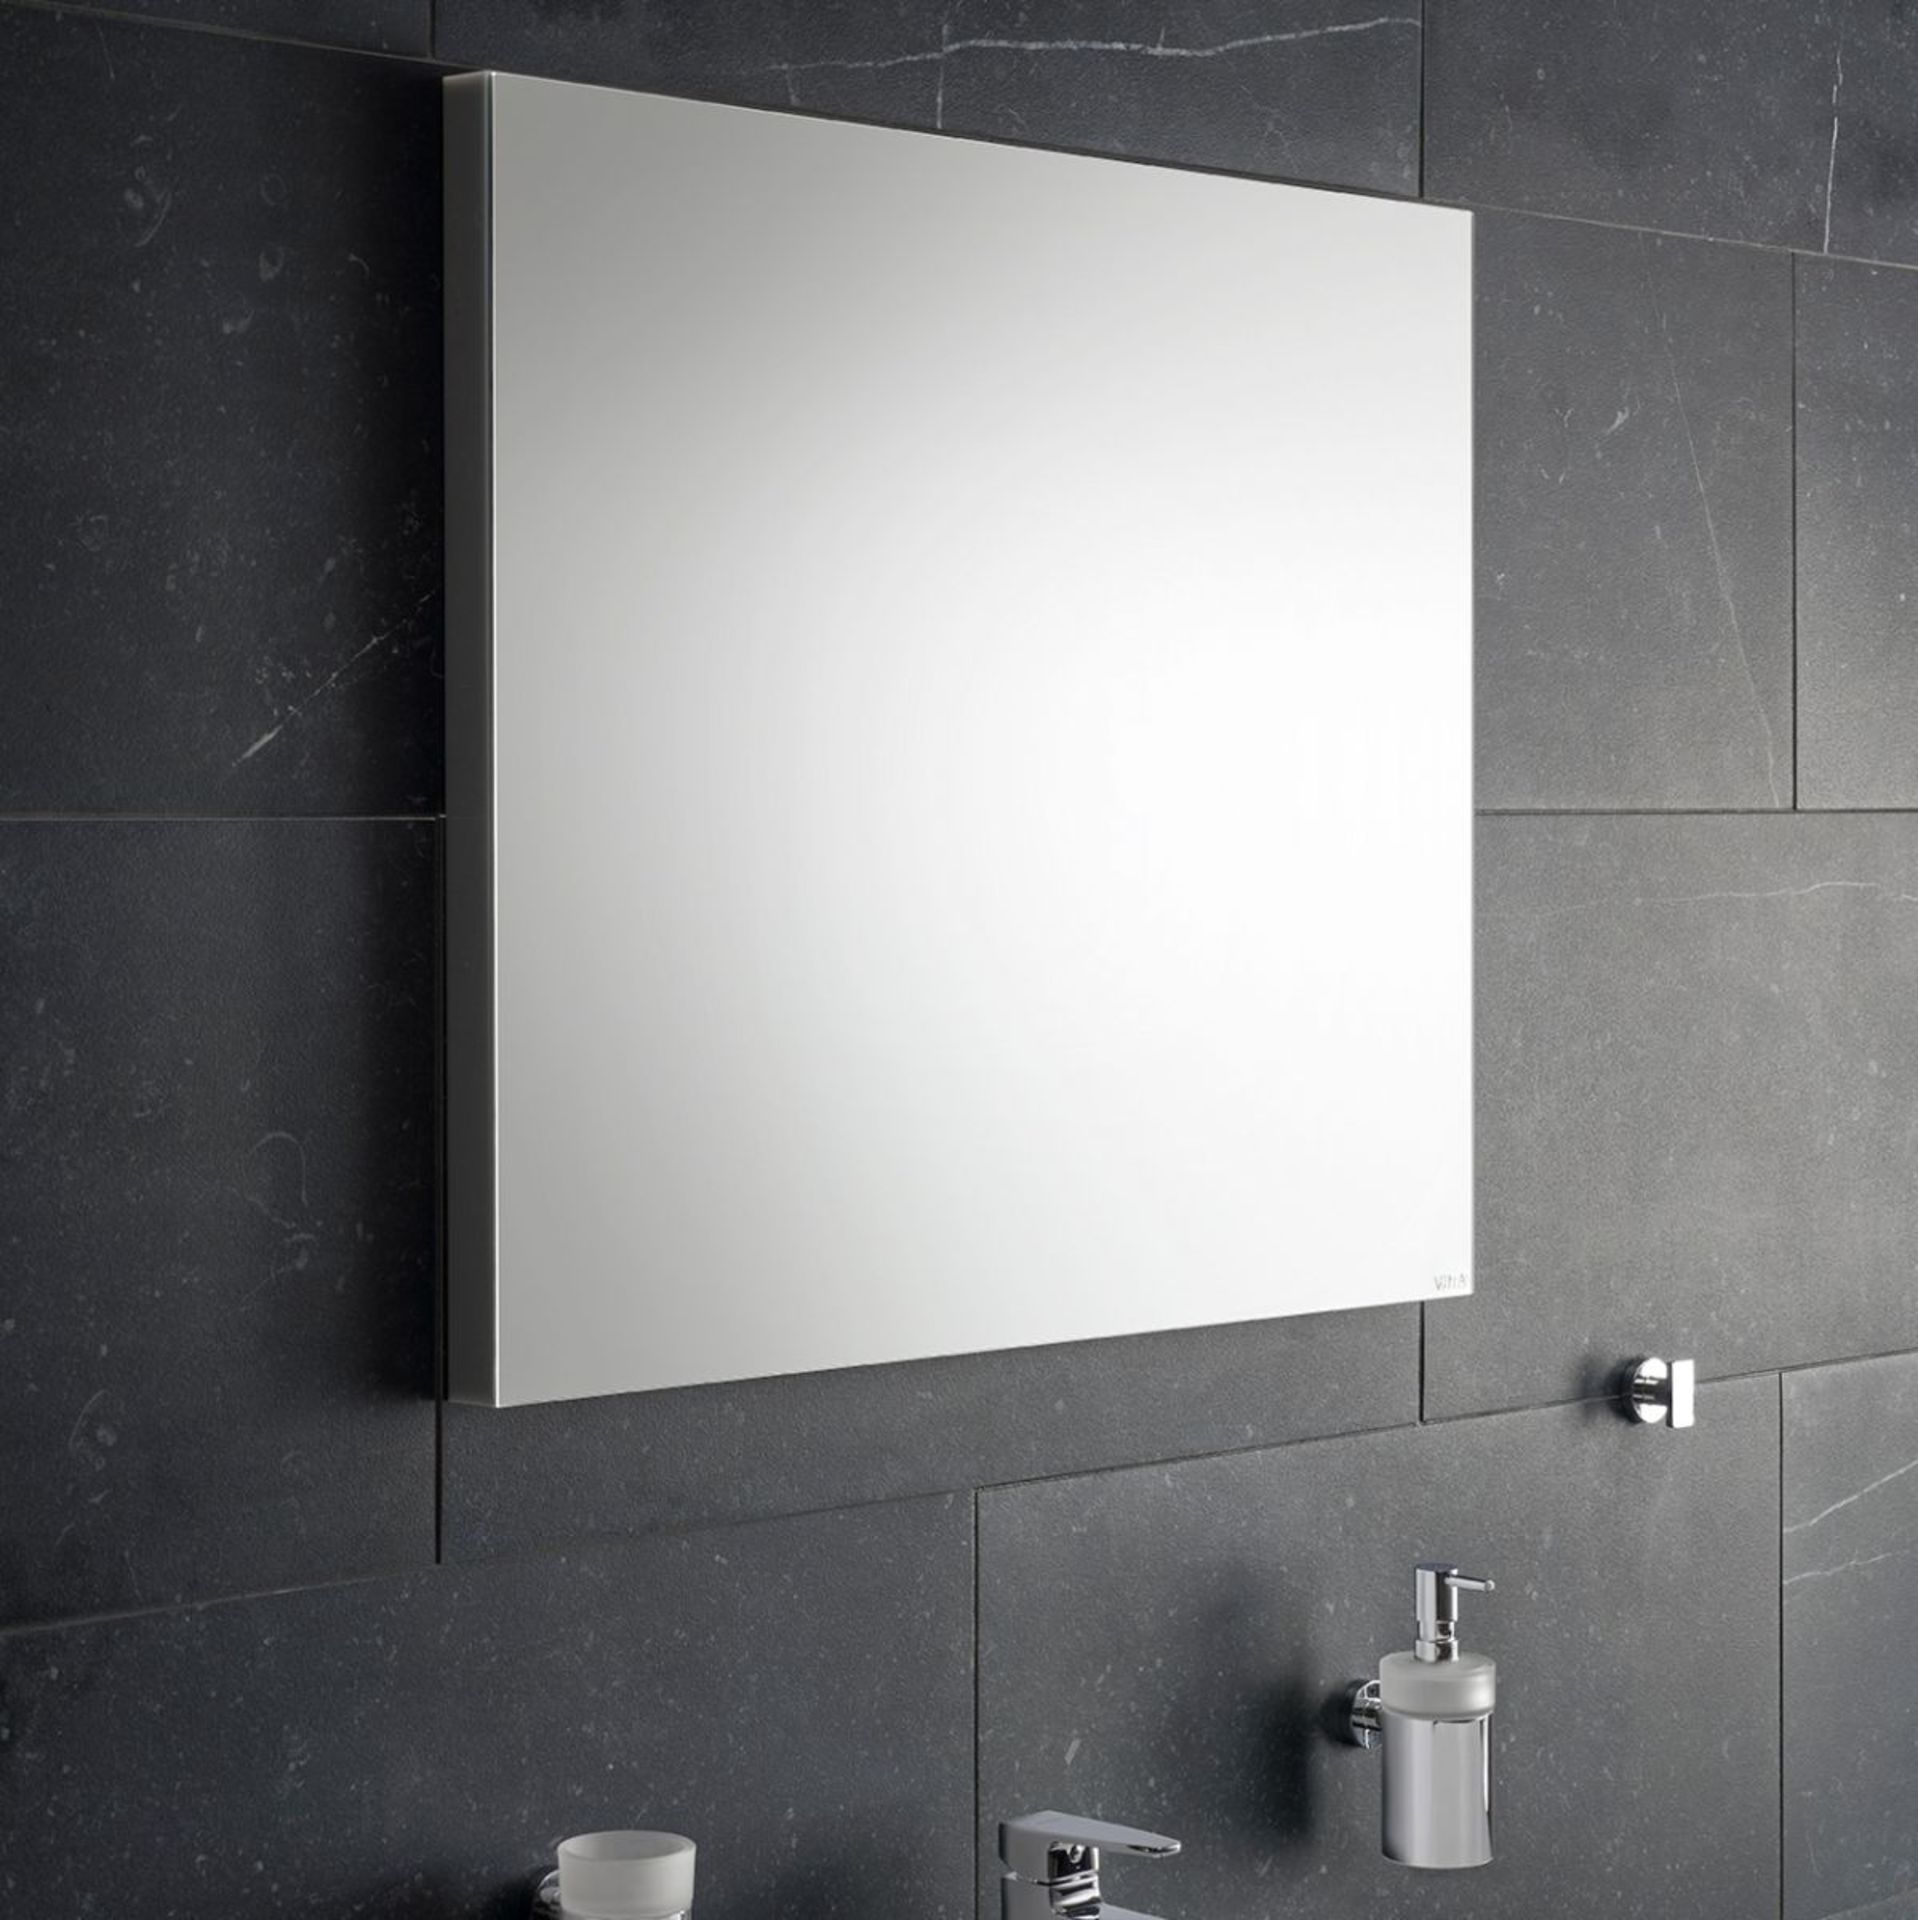 1 x VitrA Brite Illuminated 60cm Bathroom Mirror With On/Off Touch Control - New - RRP £195 - Image 2 of 3